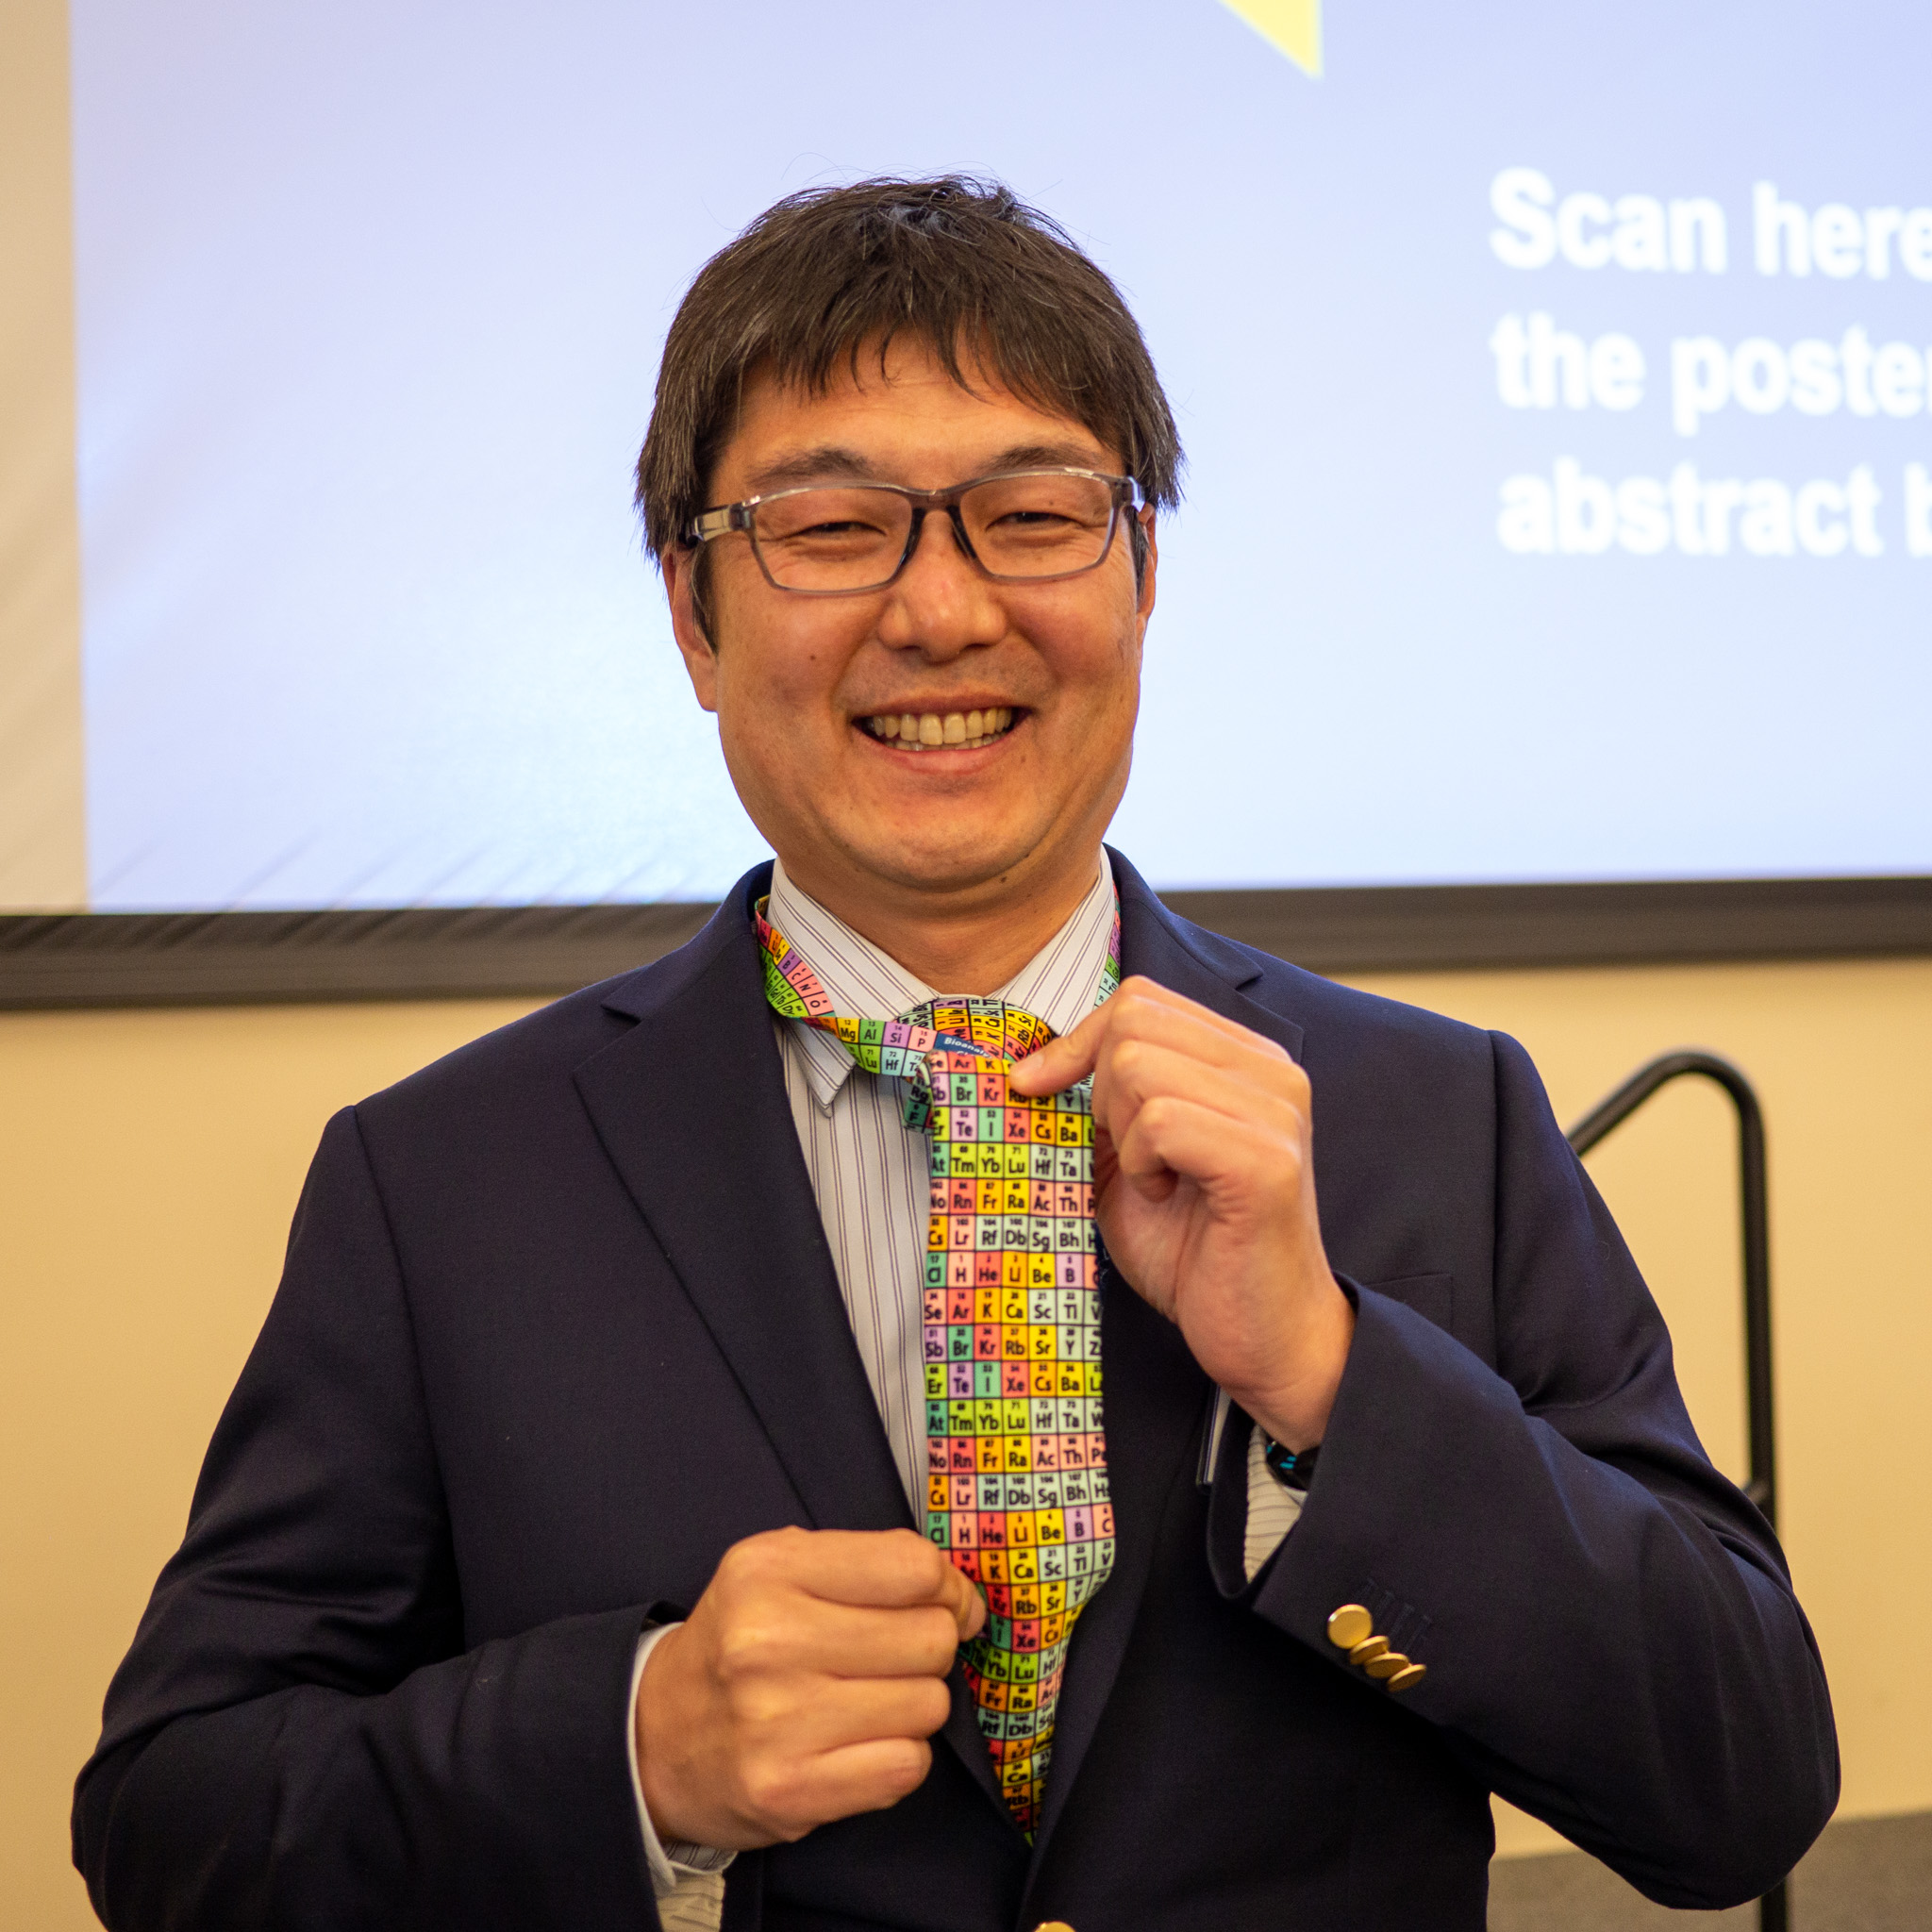 Shota Atsumi shows off his periodic table-themed tie. 